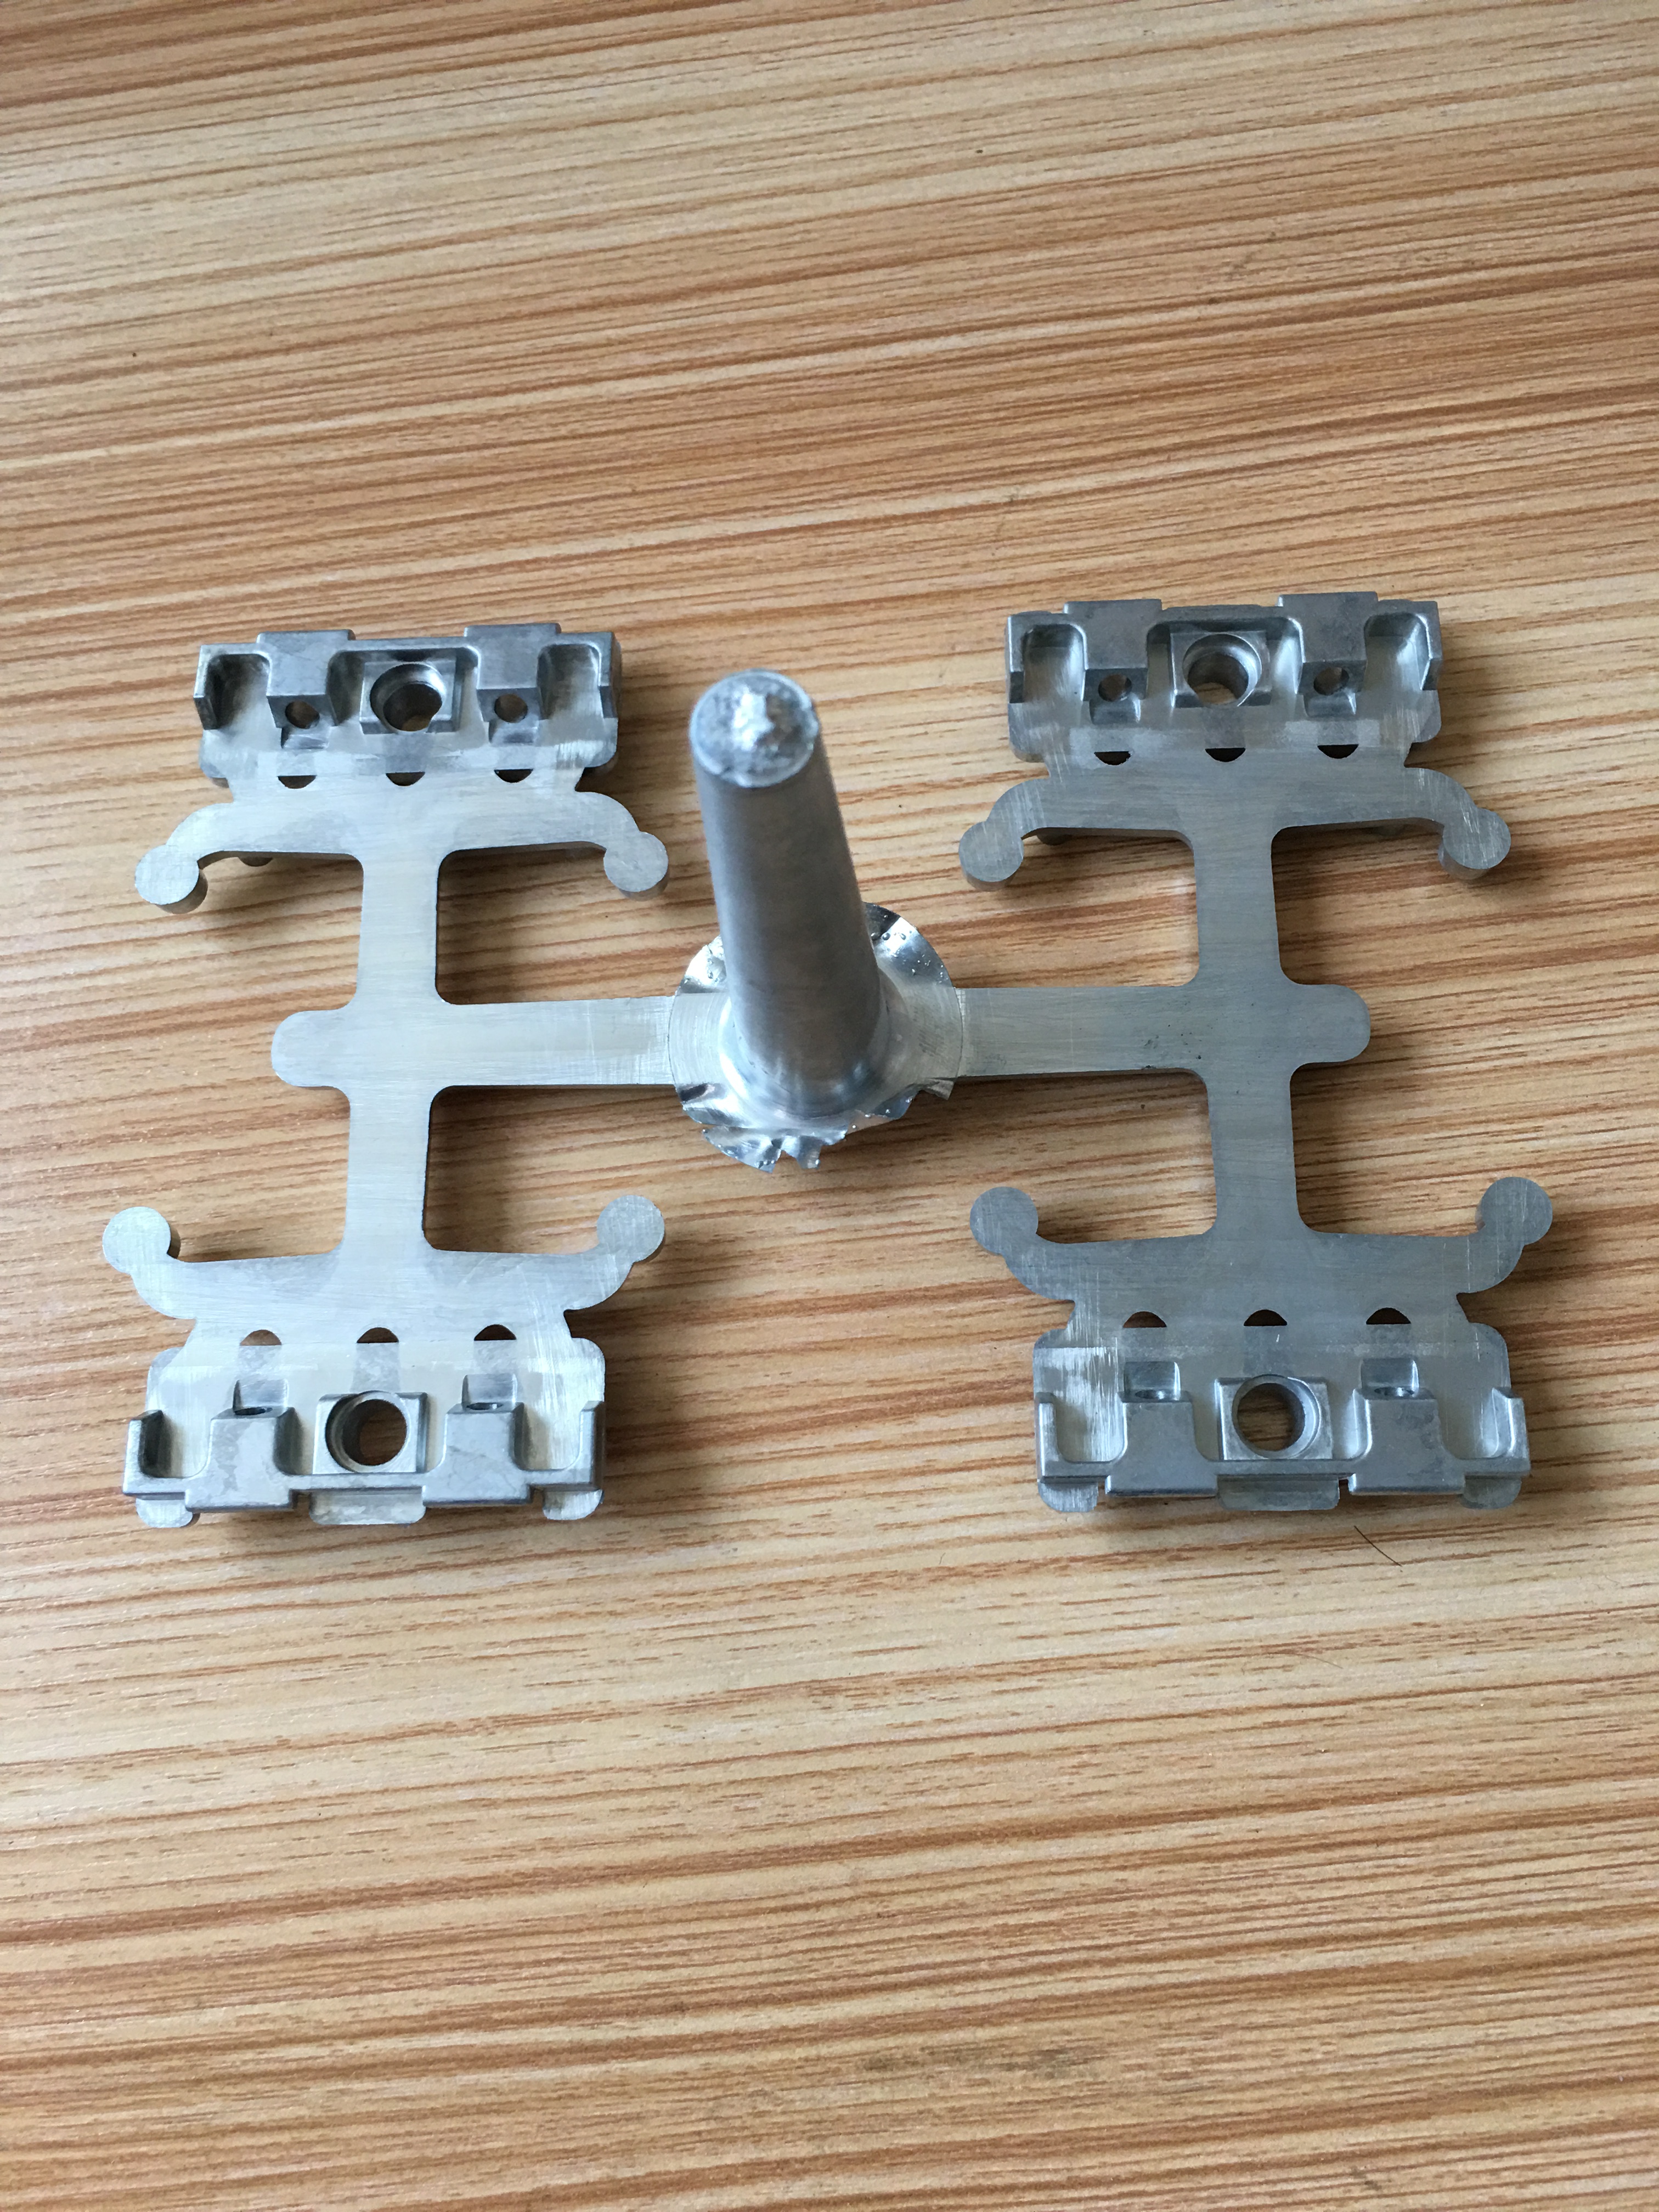 As a injection molding plastic parts manufacturer, your factory scale